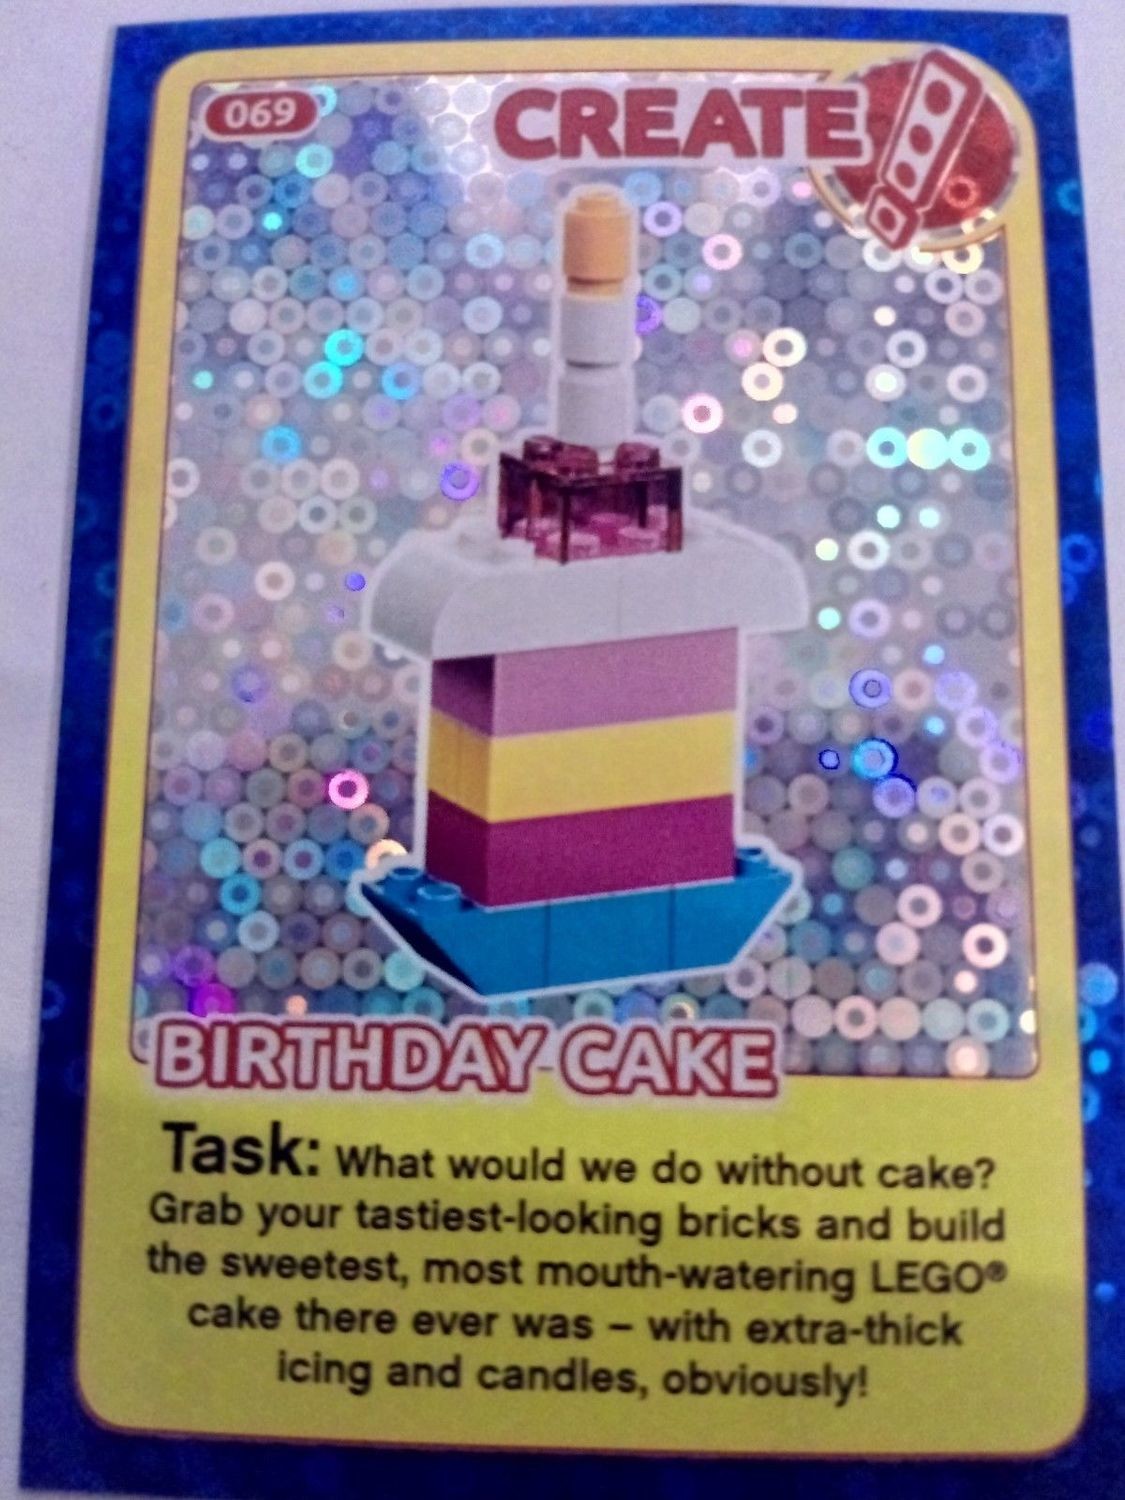 Birthday Cake Sainsburys Lego Incredible Inventions 2018 Card 0069